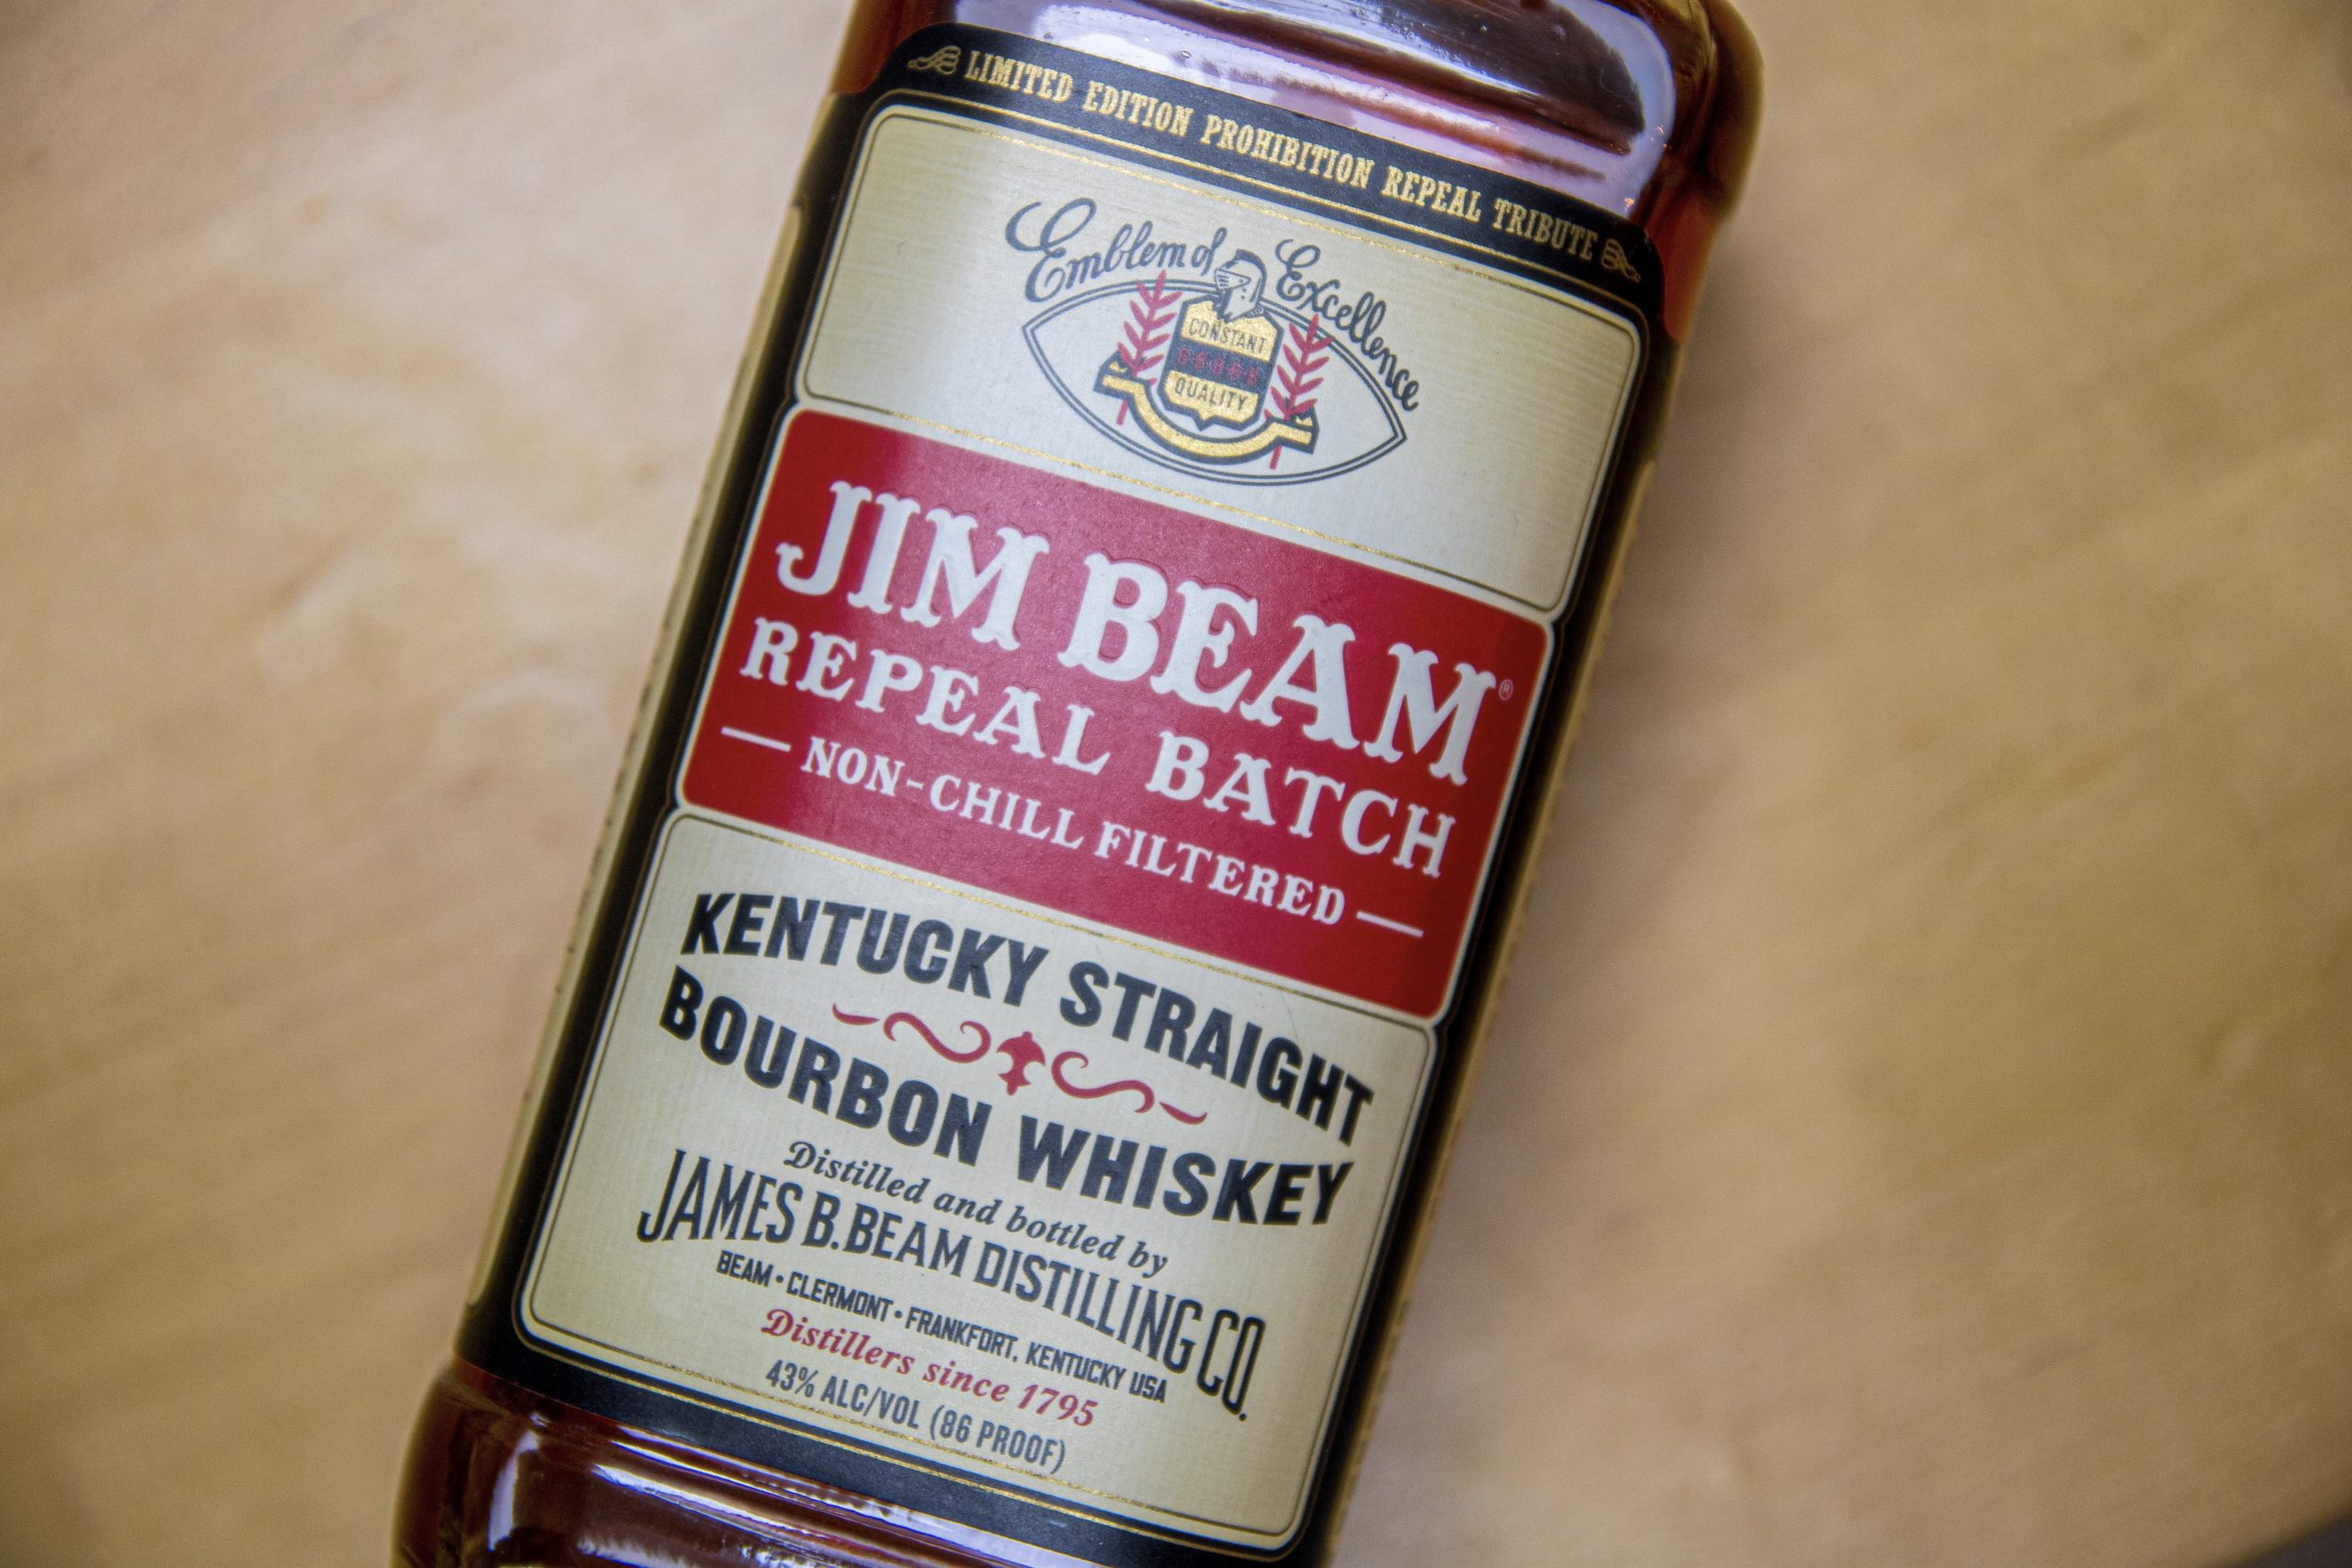 You are currently viewing Jim Beam Repeal Batch Review